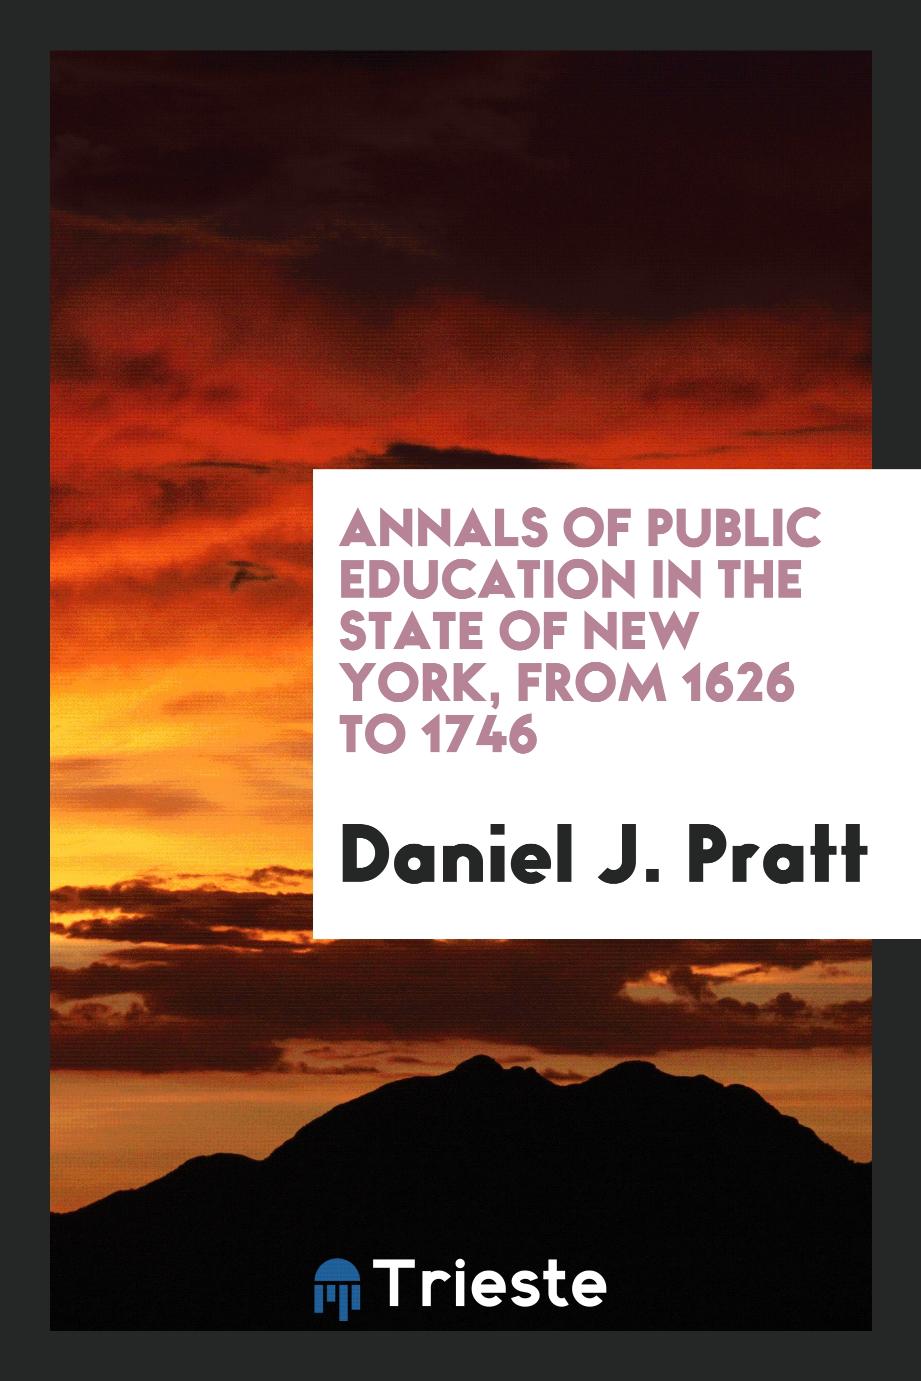 Annals of Public Education in the State of New York, from 1626 to 1746